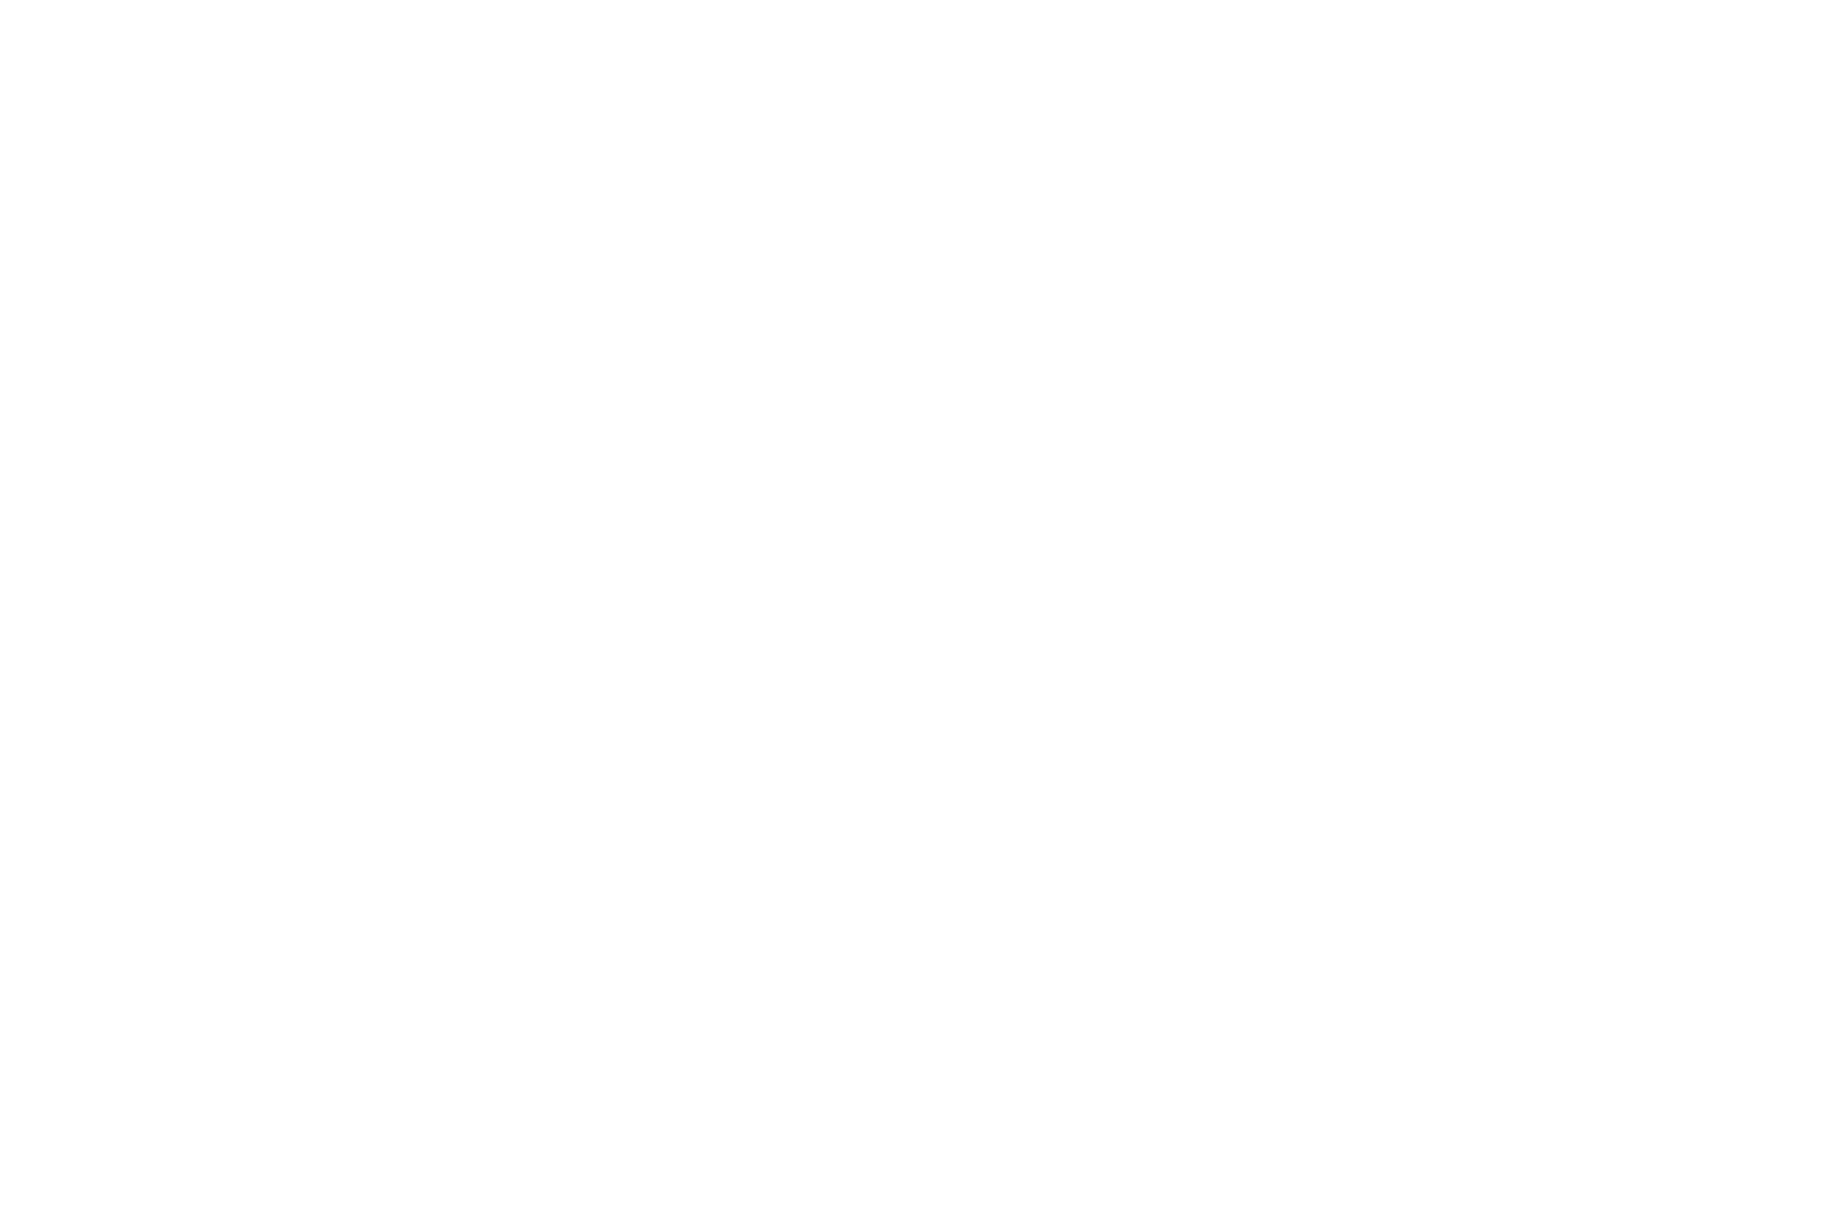 HorrorScope – A Hand-made Horror Font Foretelling Creepy Tales of Terror!